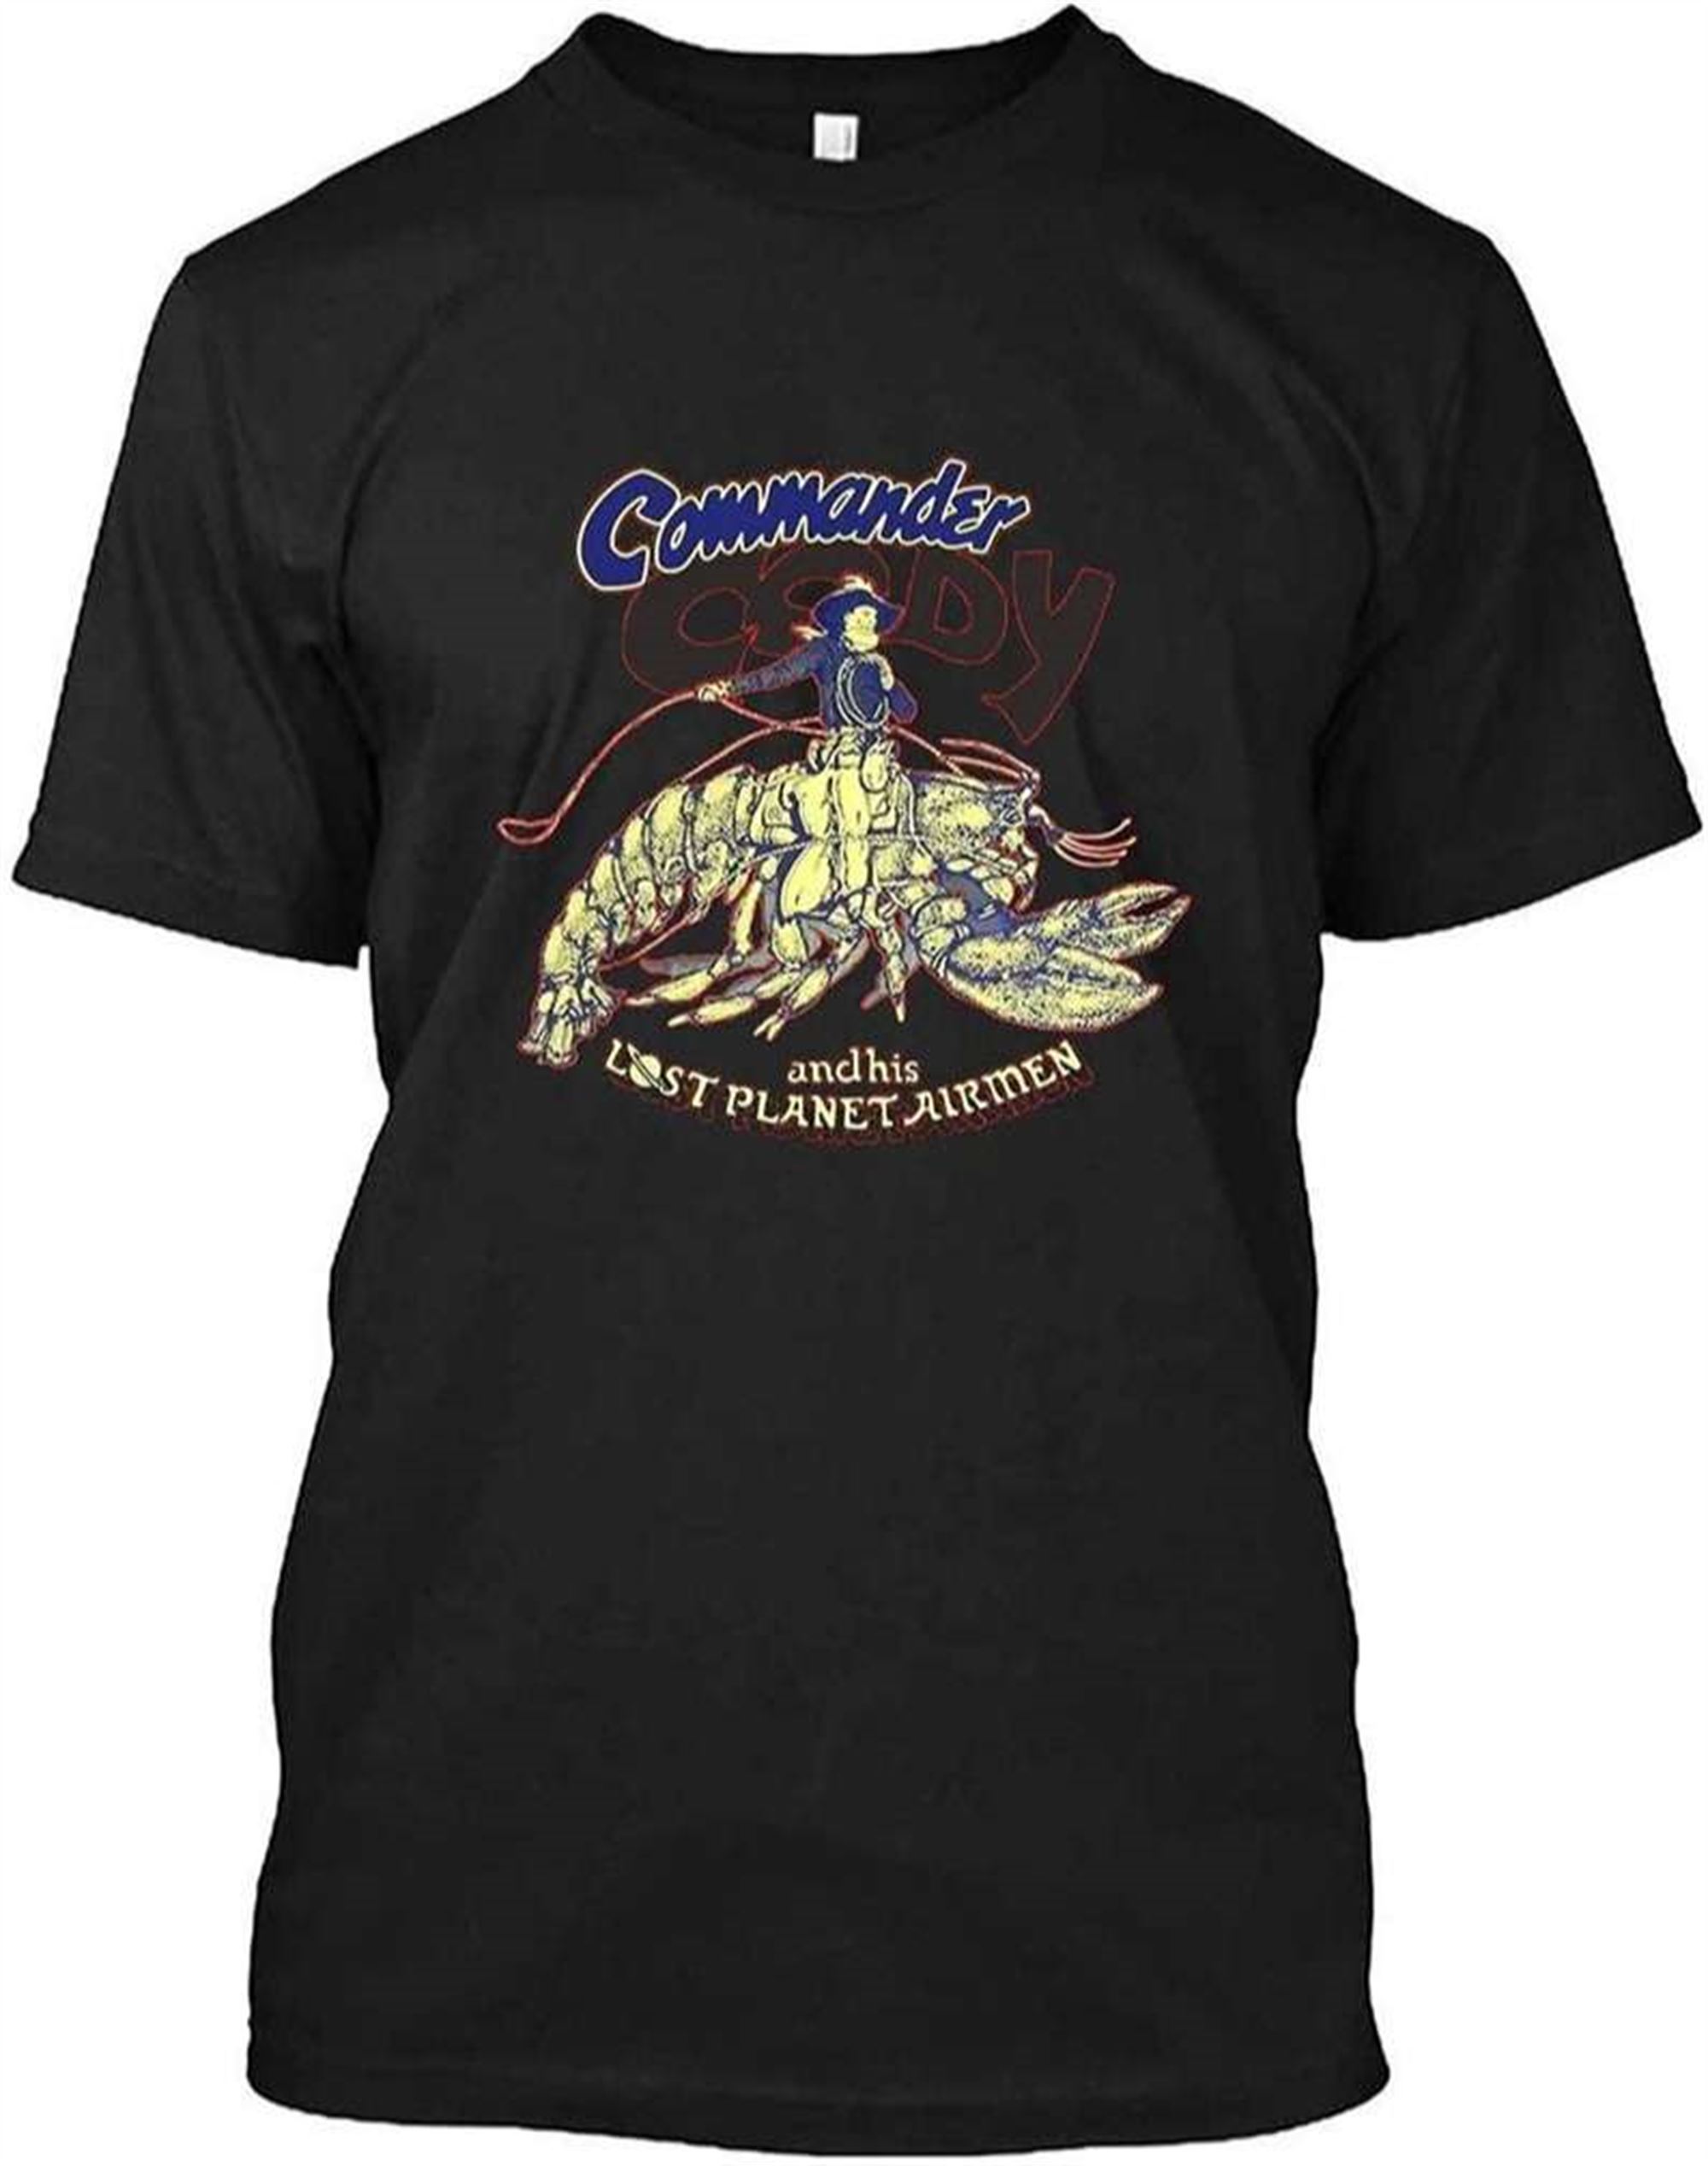 Commander Cody And His Lost Planet Airmen Classic T-shirt Full Size Up To 5xl